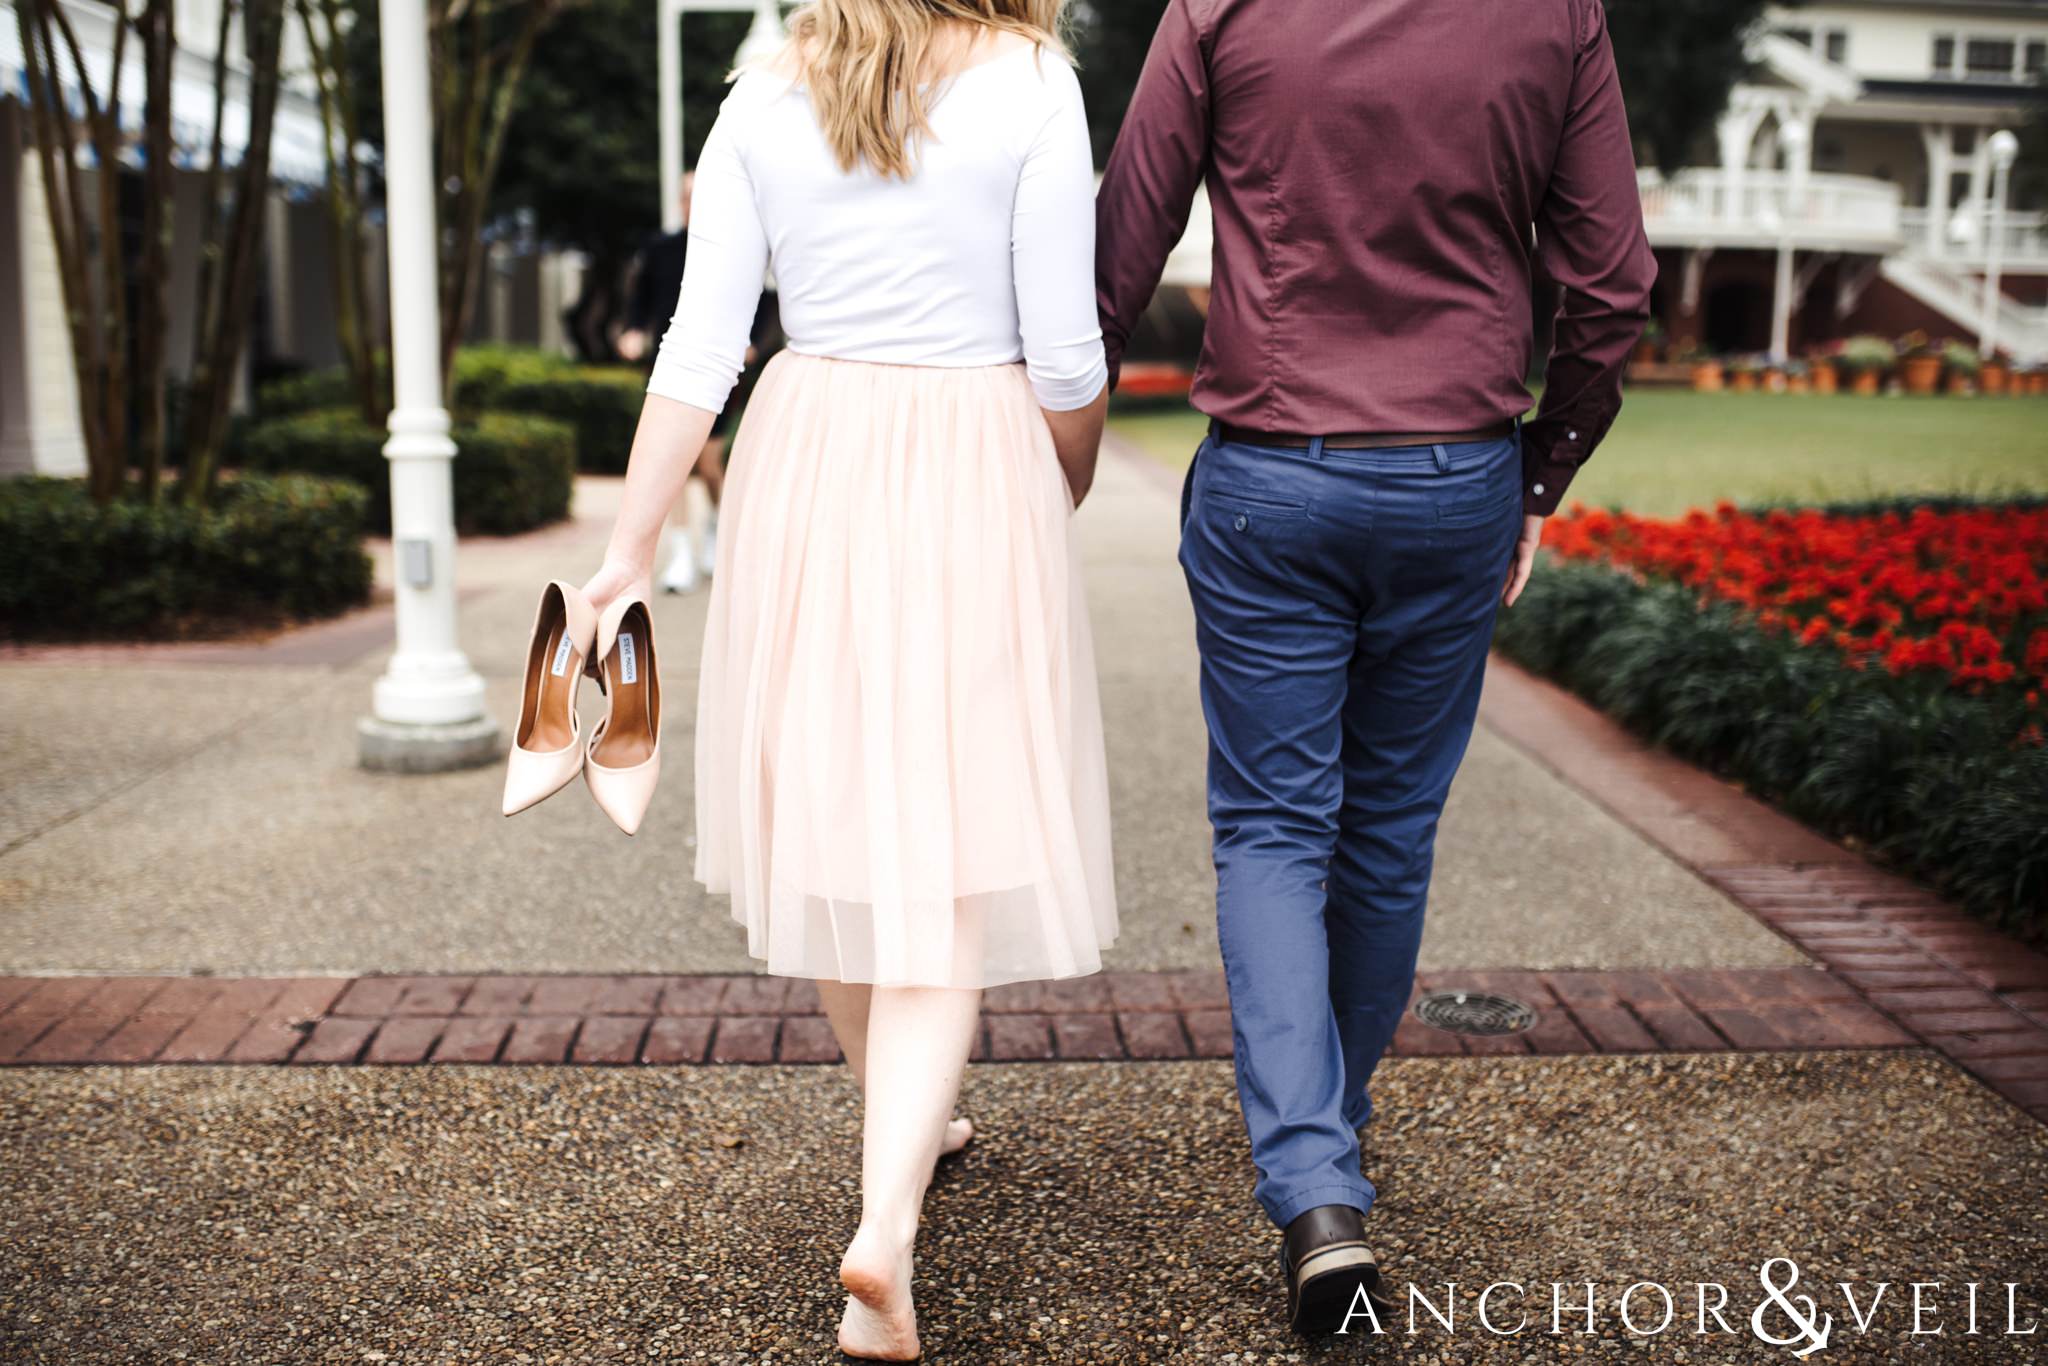 walking hand in hand during their Disney world engagement session at the Boardwalk Hotel Inn